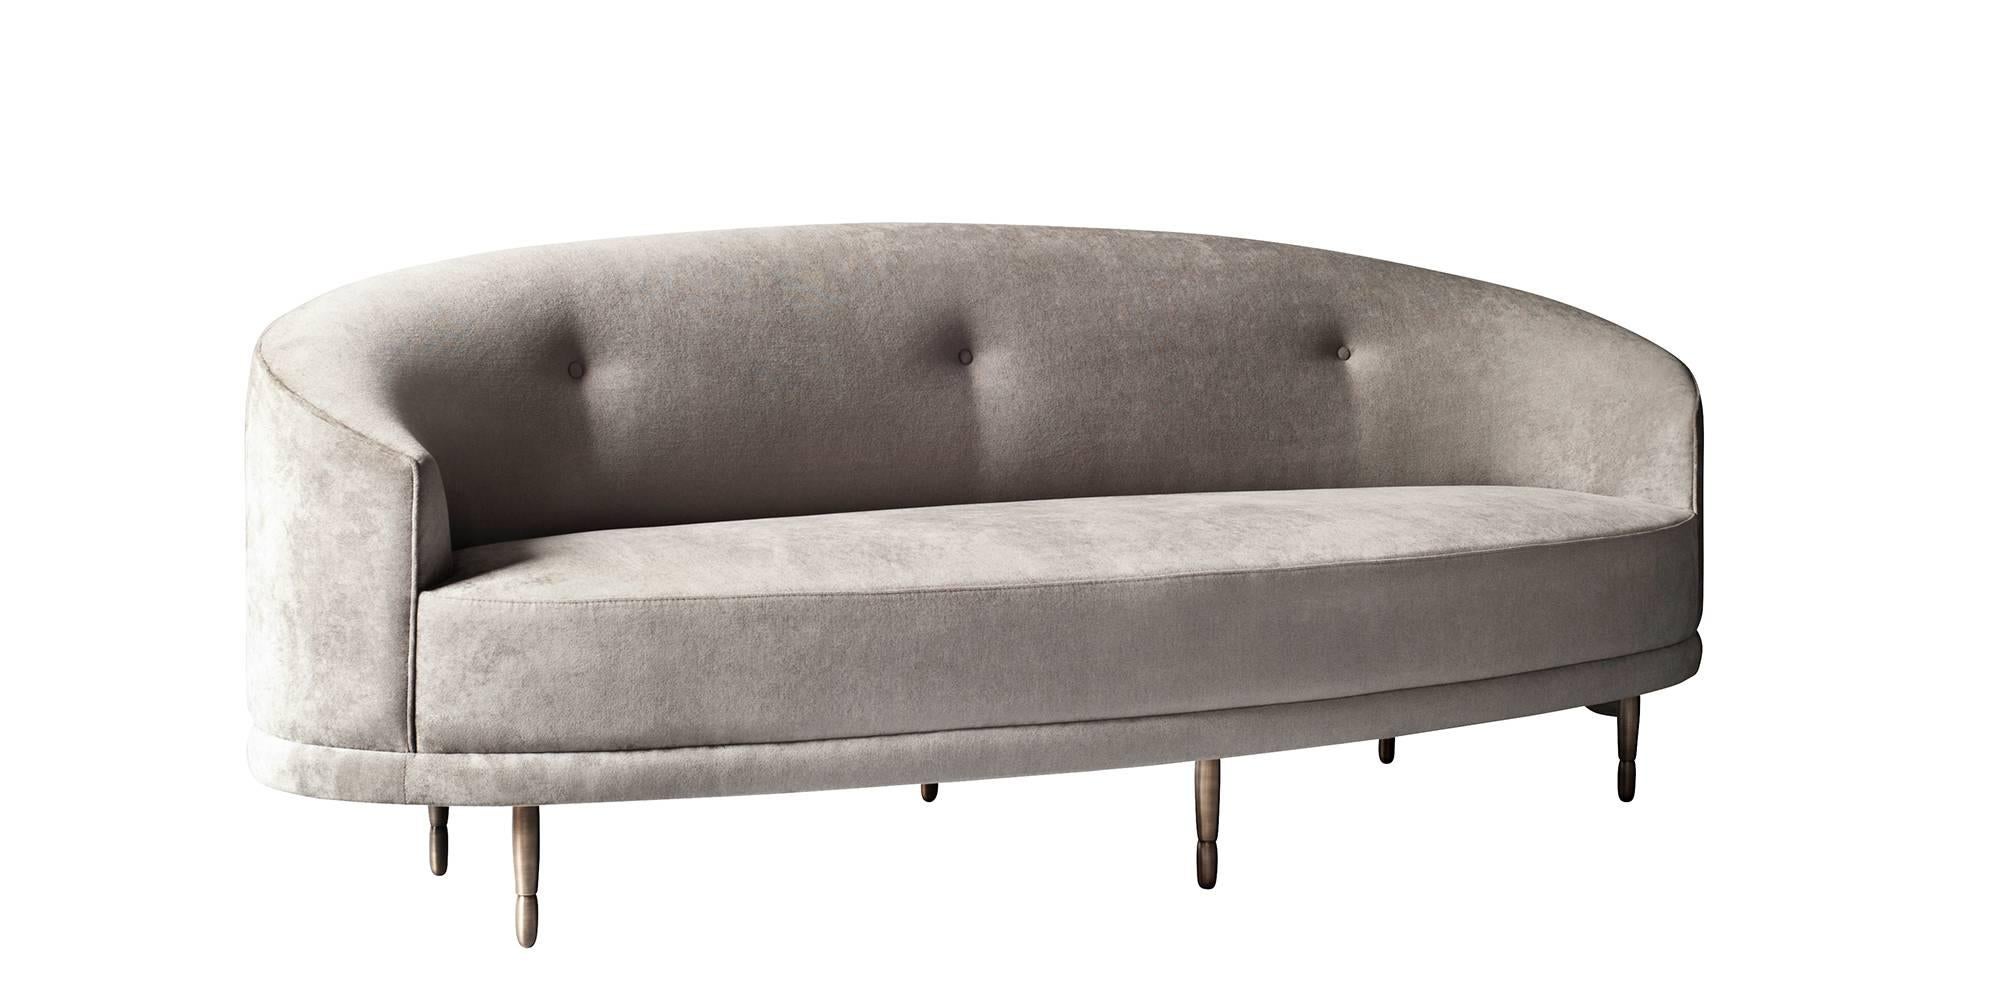 The Claire sofa by DeMuro Das has a crescent-shaped back supported by six solid bronze legs with an antique finish. Construction includes solid hardwood frame with European webbing and multi-density foam.
 
Pricing is quoted COM - does not include